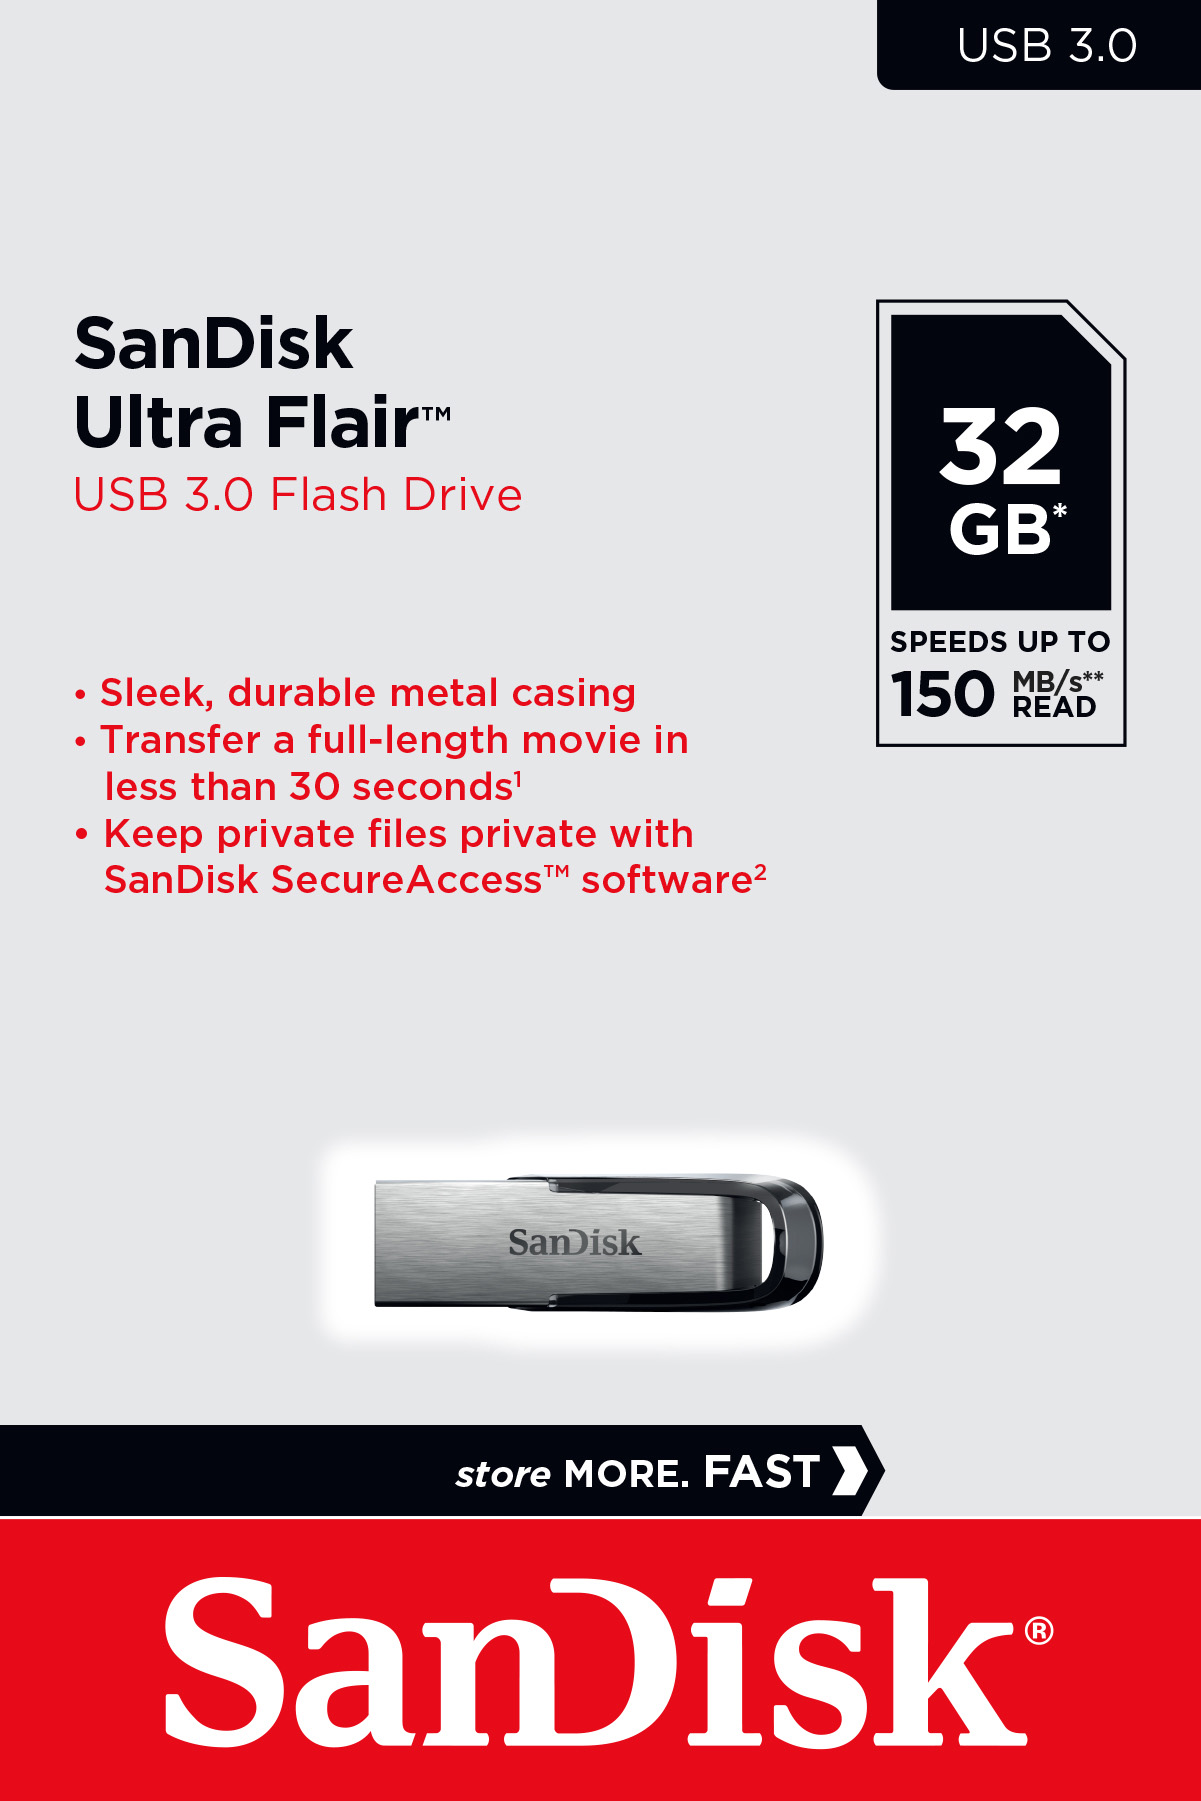 Sandisk USB 3.0 Stick 32GB, Ultra Flair Typ-A, (R) 150MB/s, SecureAccess, Retail-Blister